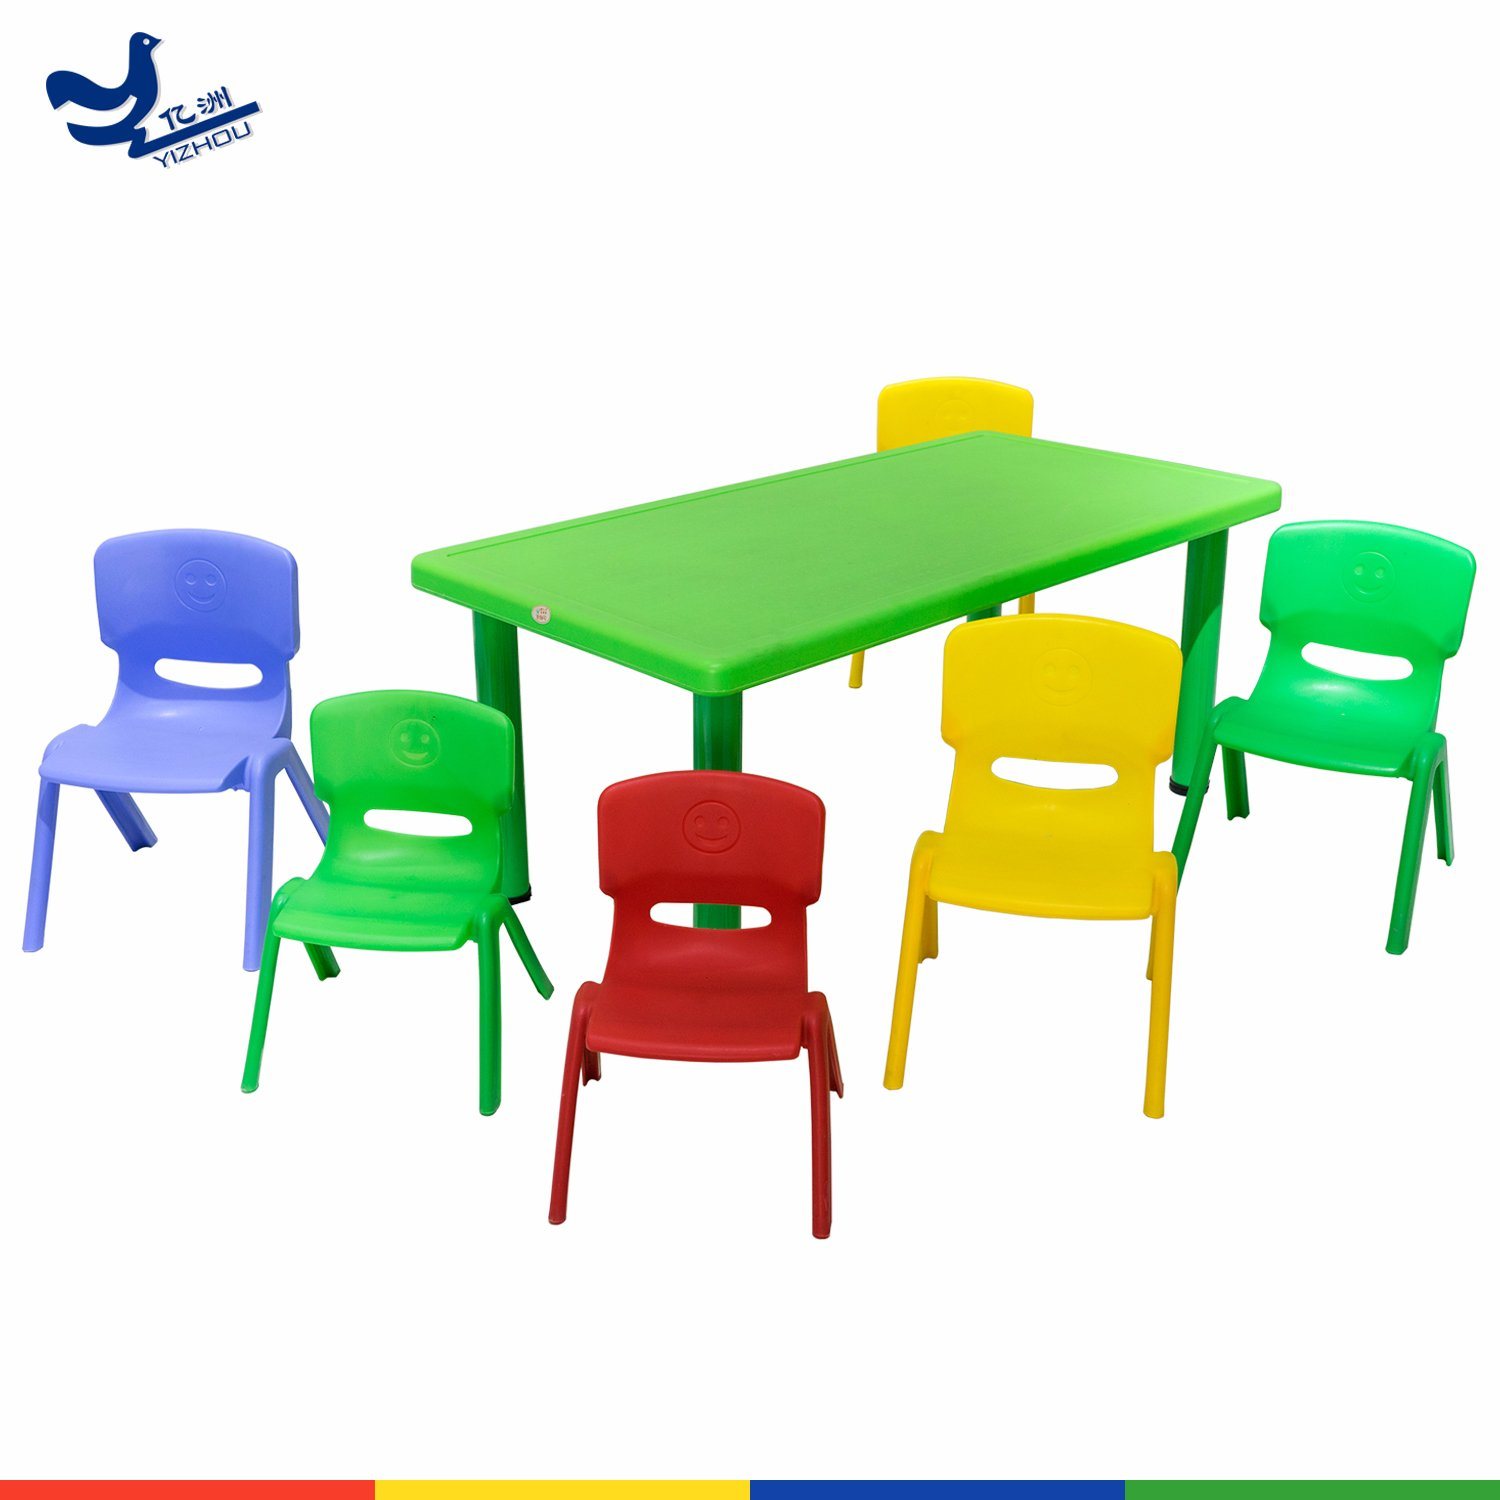 High Quality Kids Plastic Chair and Table Made of Virgin HDPE